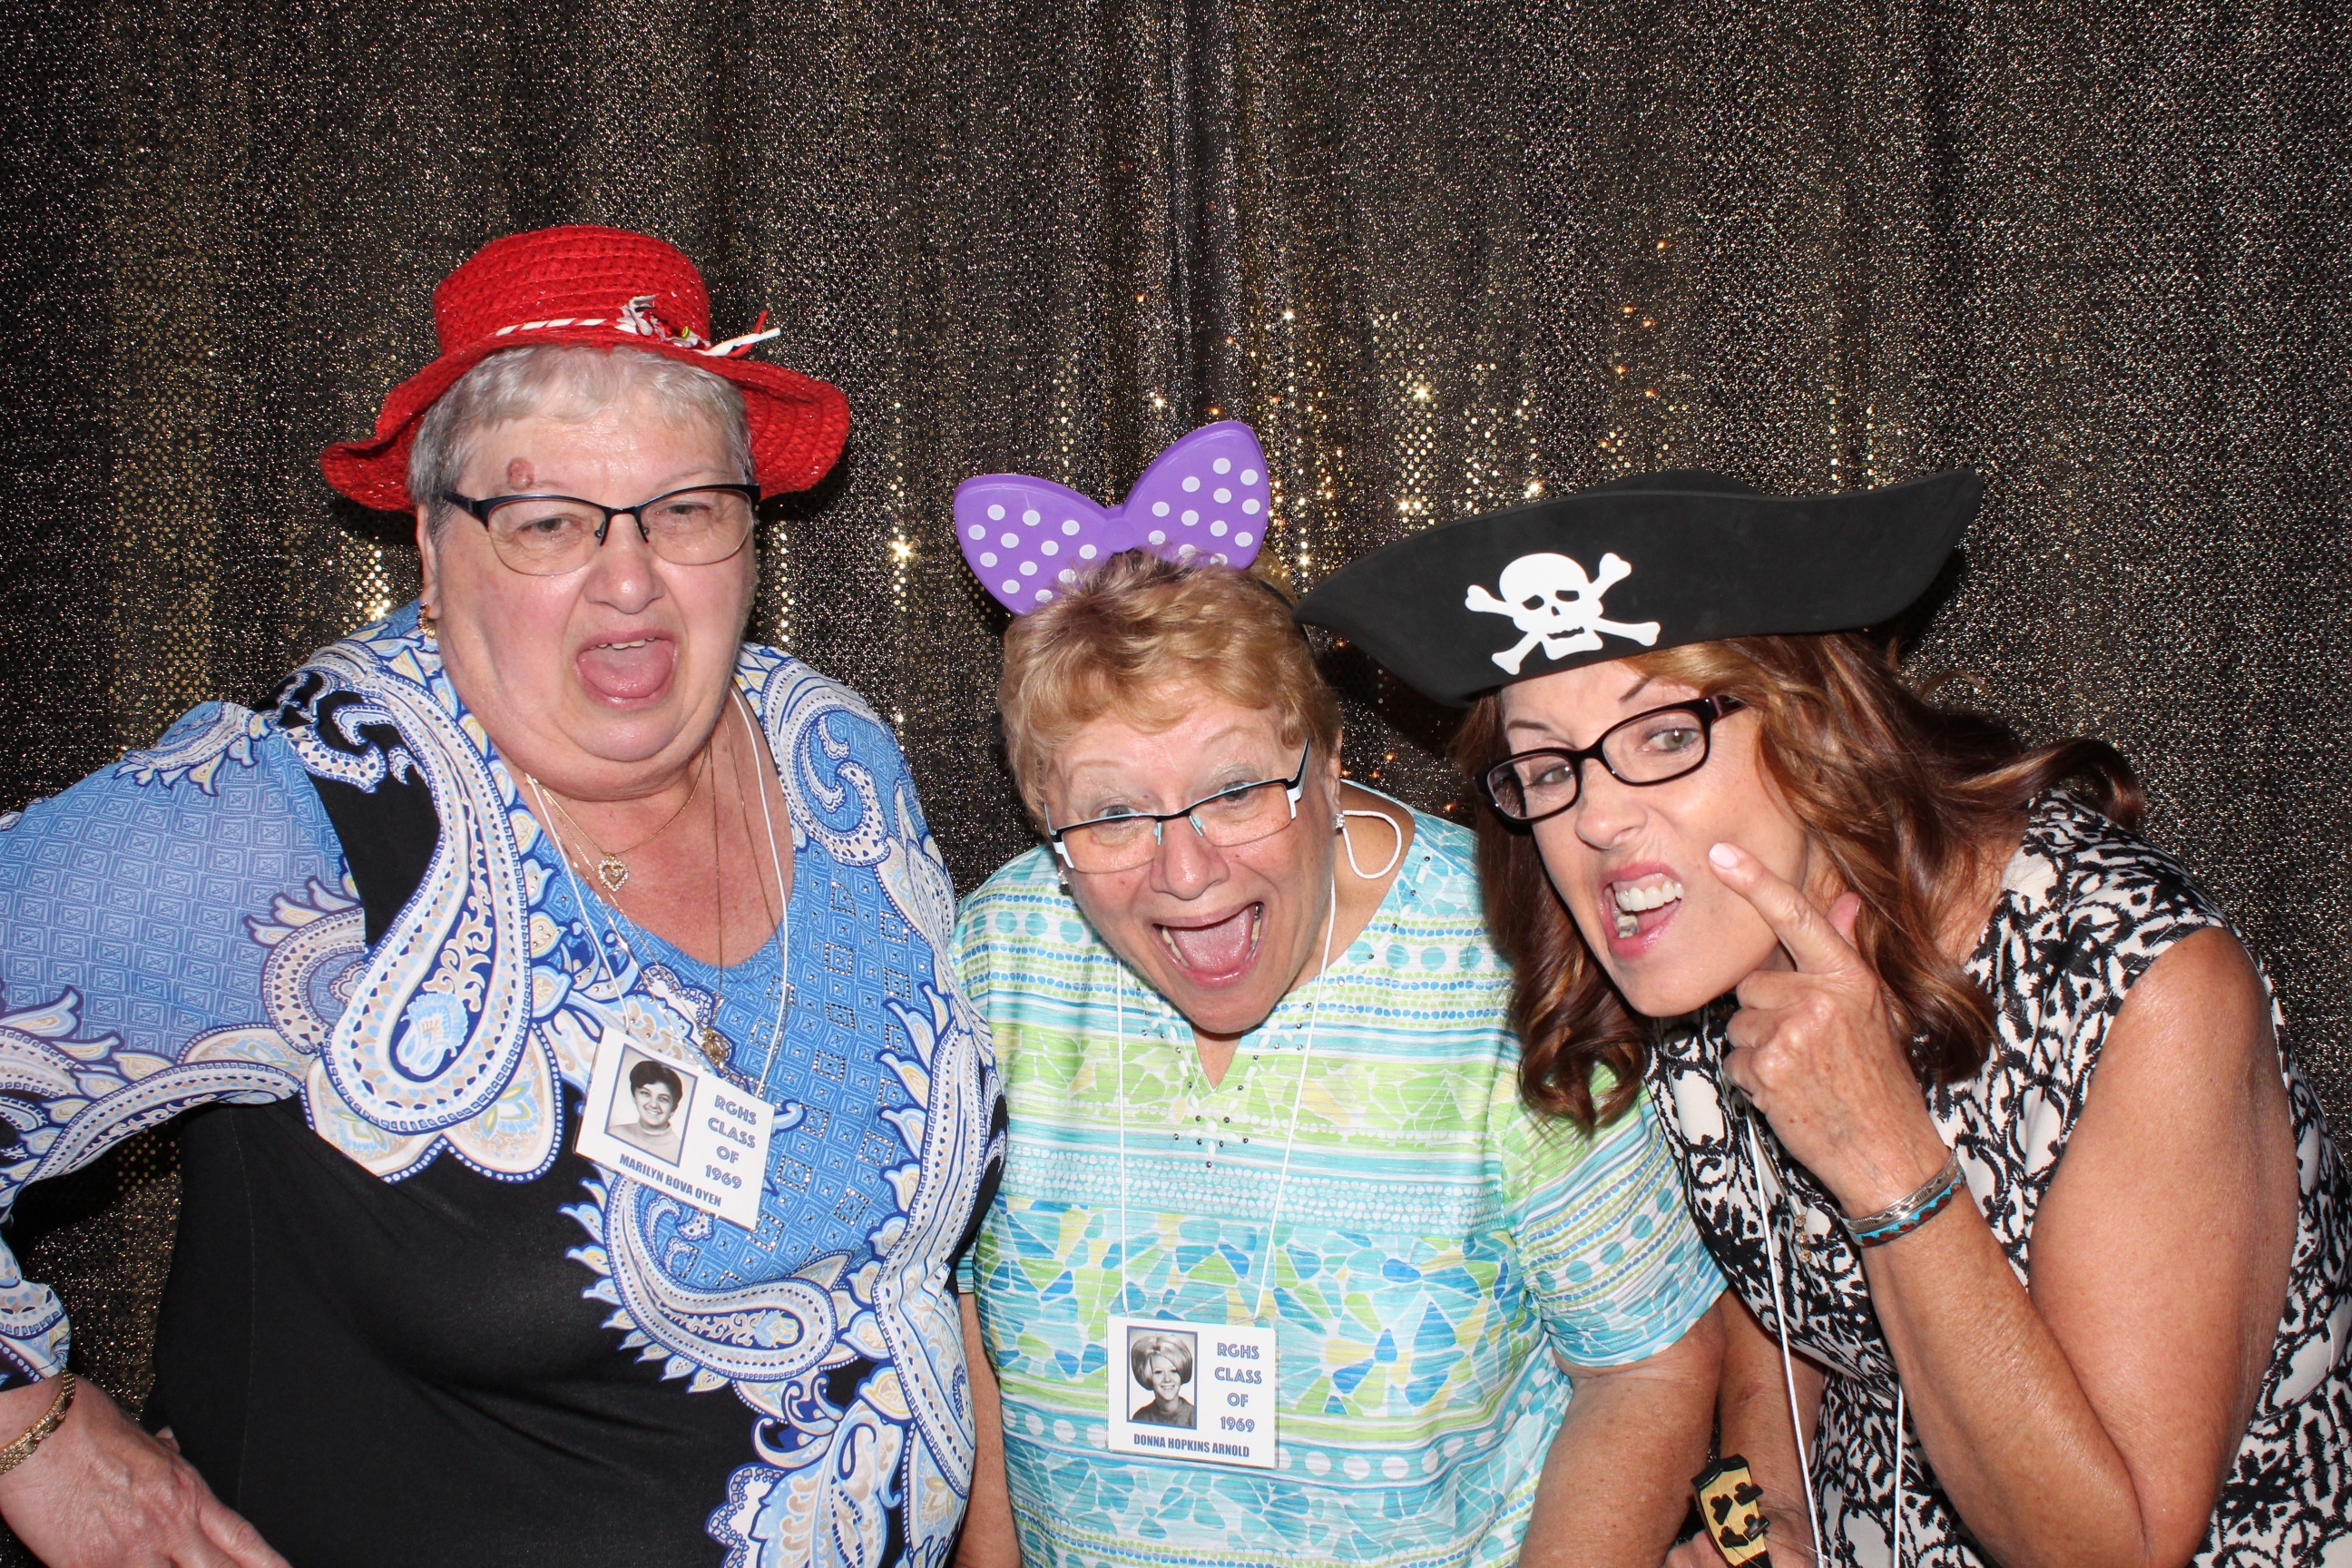 PHOTO BOOTH: Marilyn Bova, Donna Hopkins and Sherry Anderson